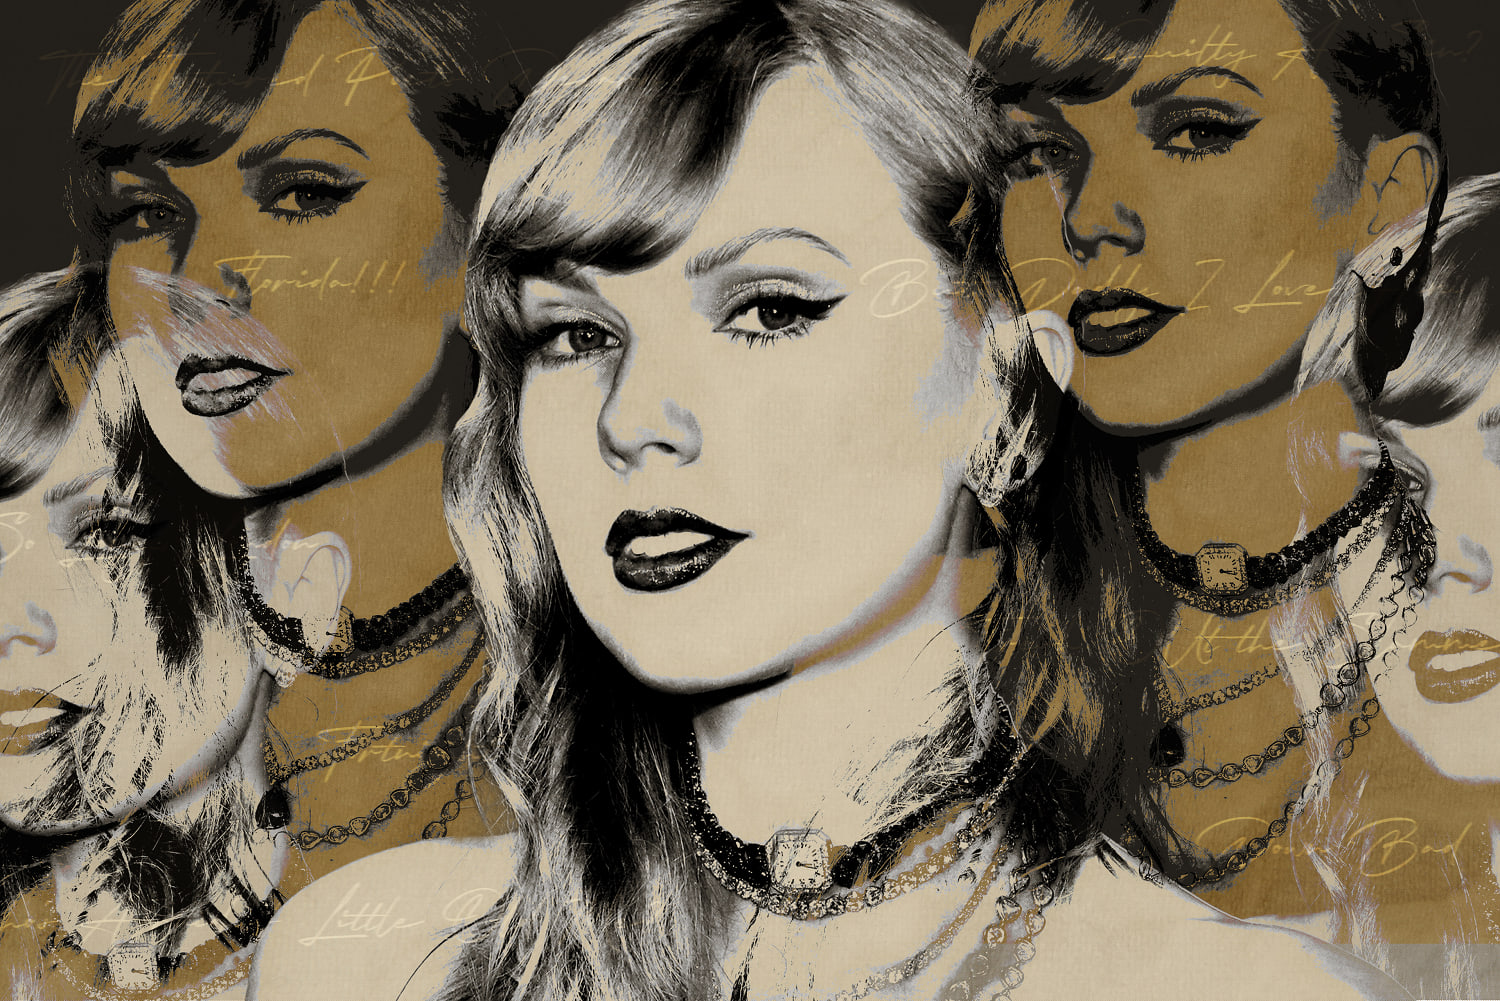 Taylor Swift dropped a new album, then surprised fans at 2 a.m. with 15 more songs